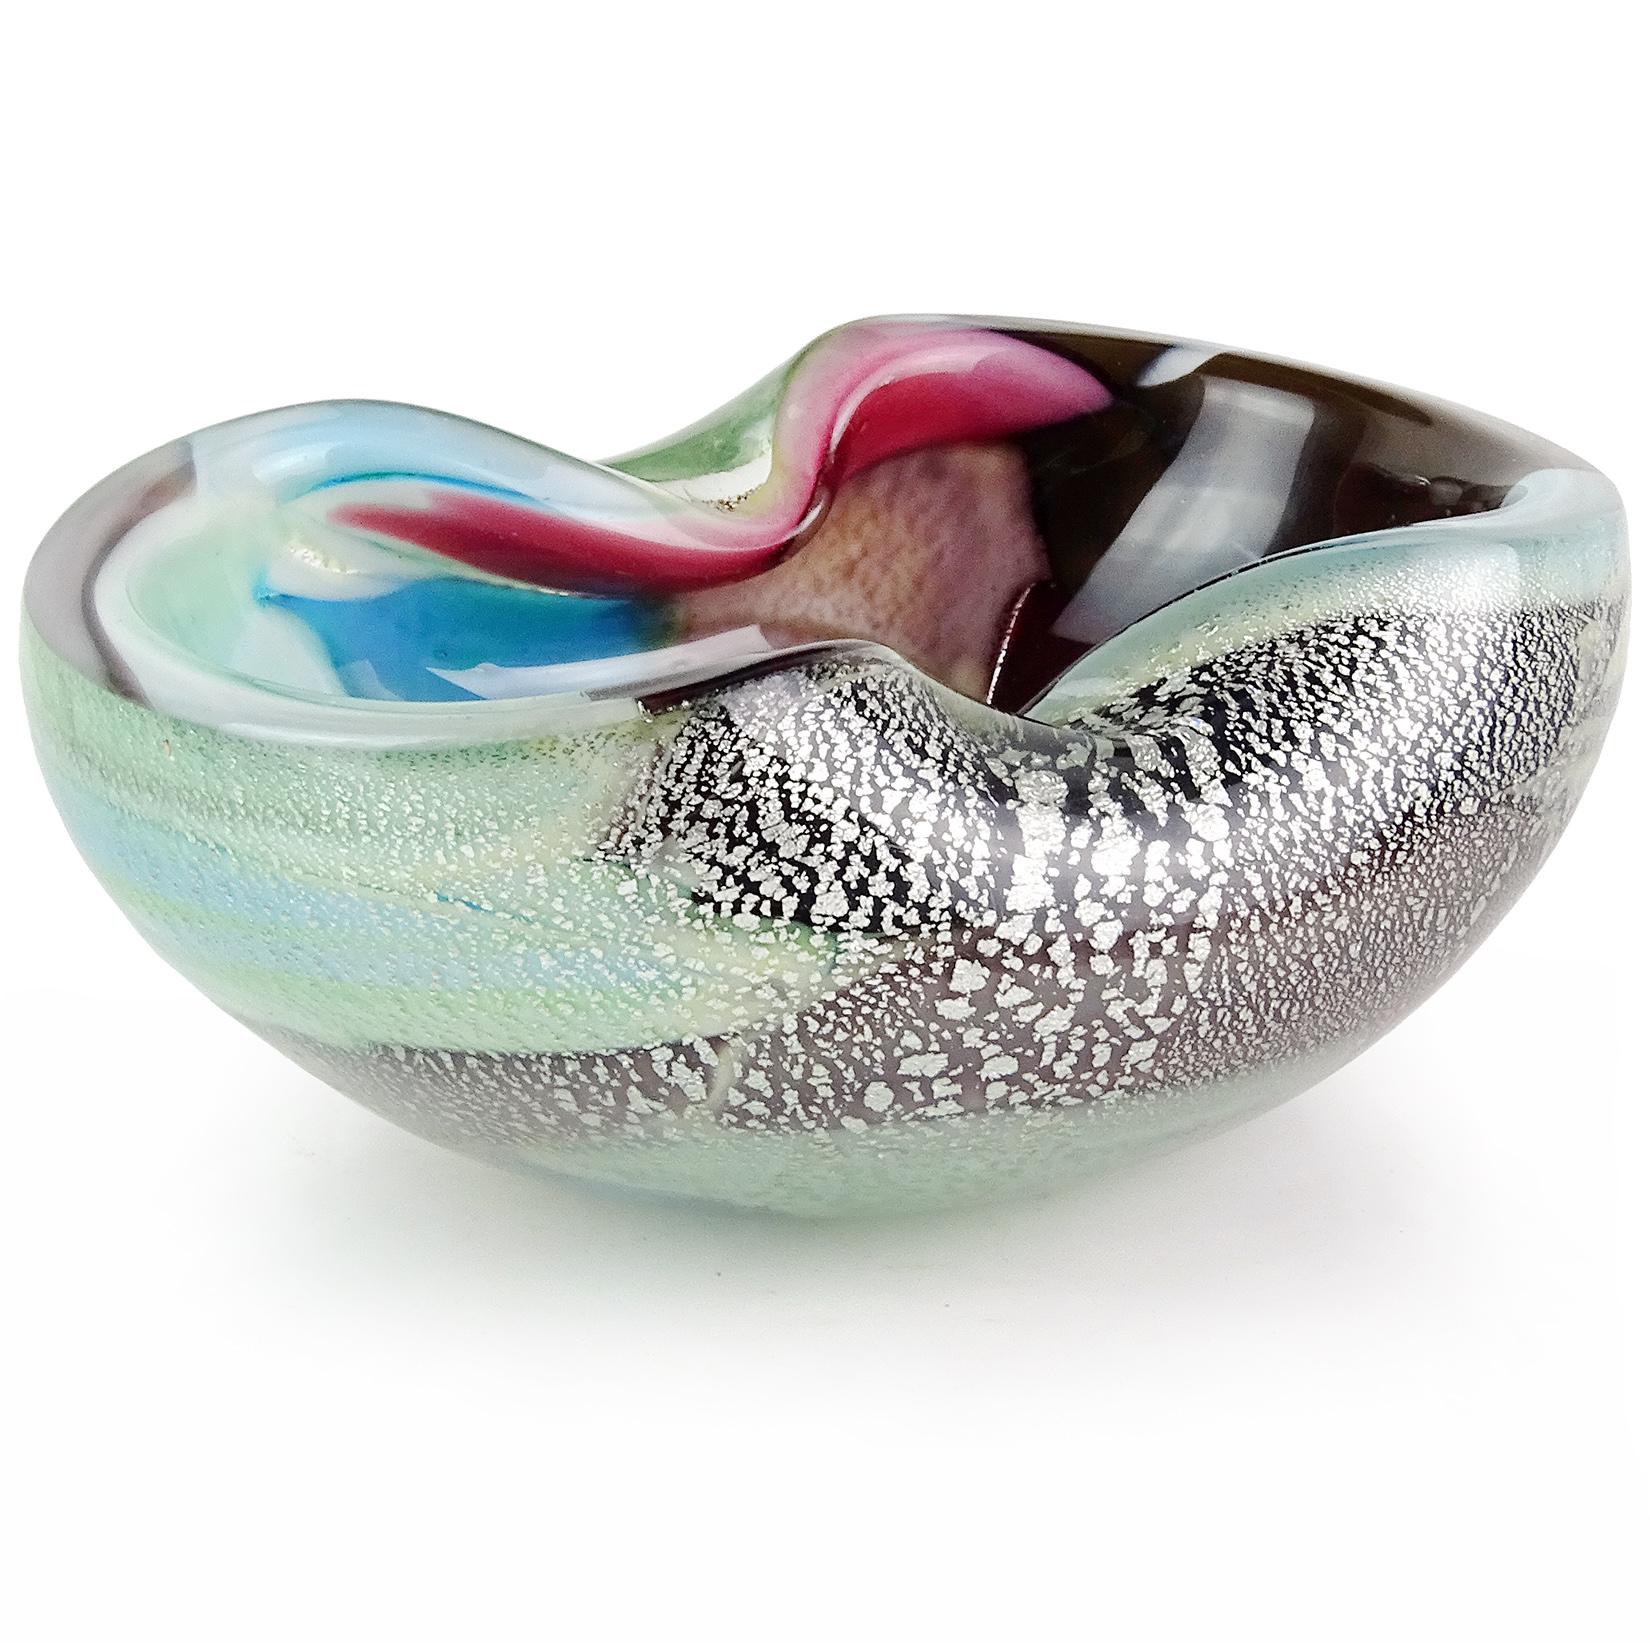 Beautiful vintage Murano hand blown multi-color and silver flecks Italian art glass bowl. The bowl has patches of different colors, like pink, teal, blue, brown, orange, and red. Created in the manner of designer Dino Martens. Can be used as a